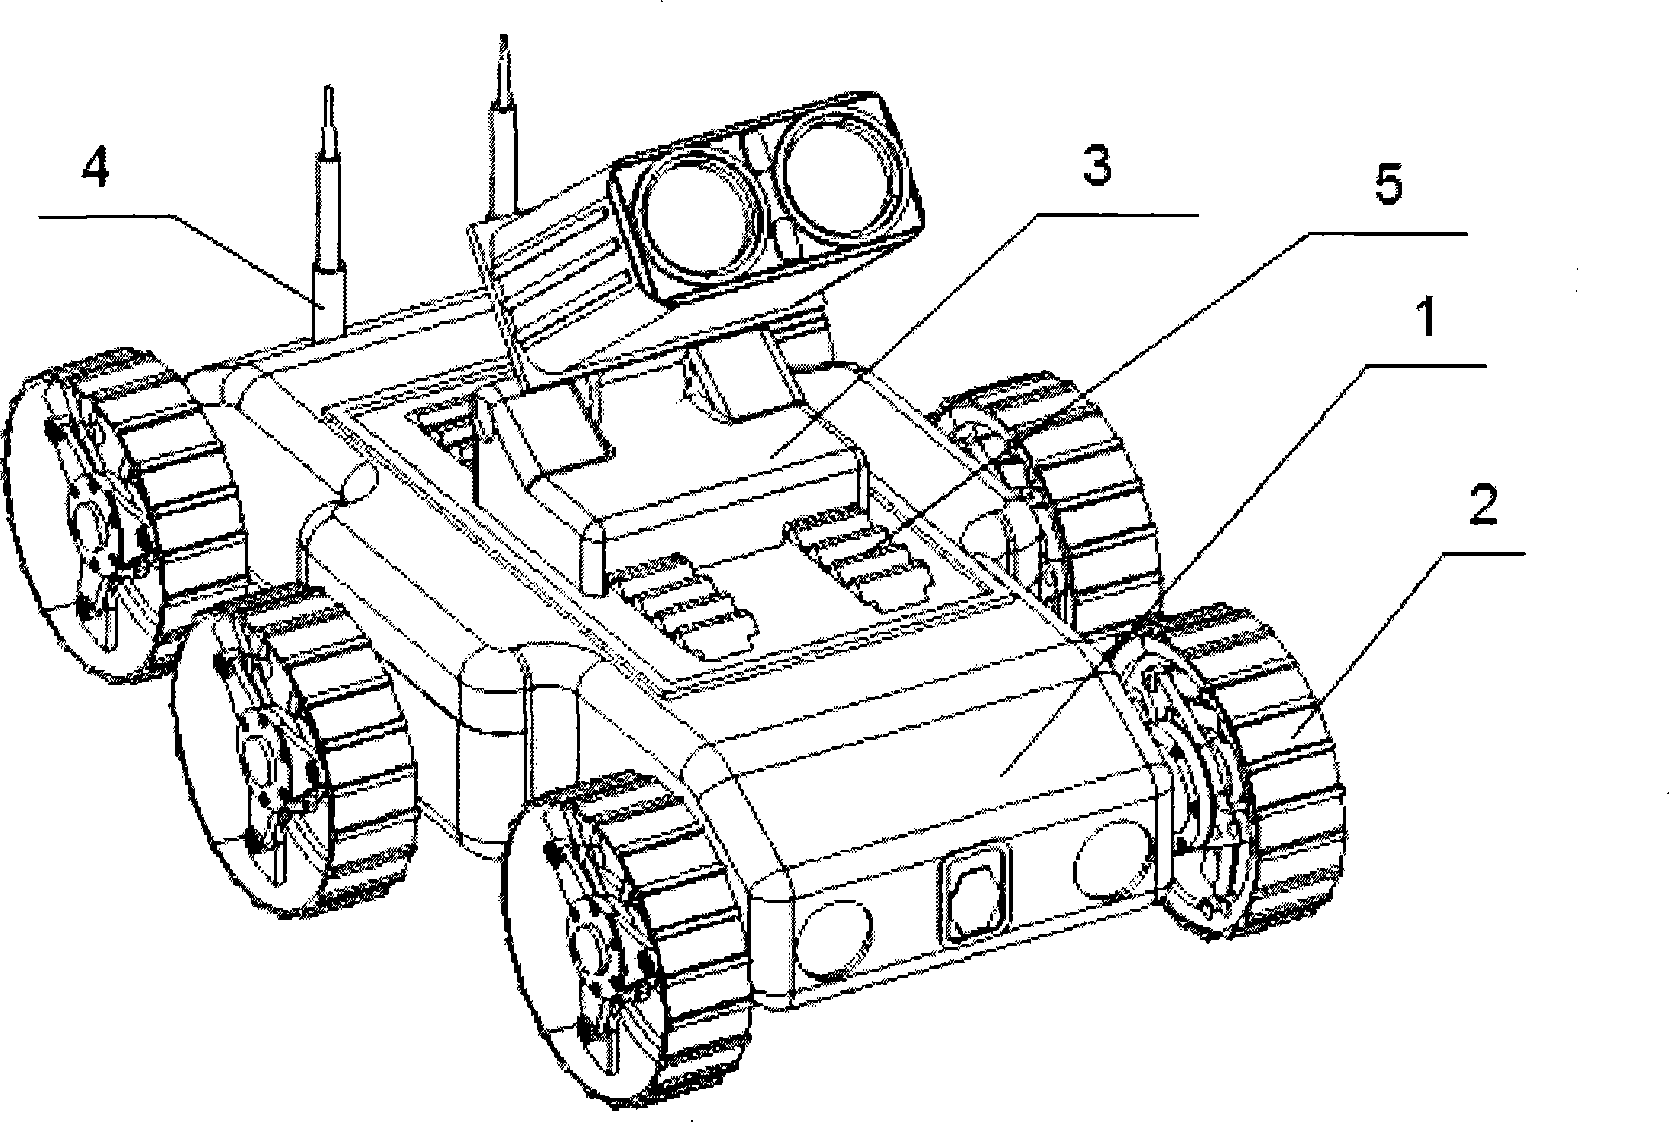 Portable moving device with wheel-leg hybrid advancing function